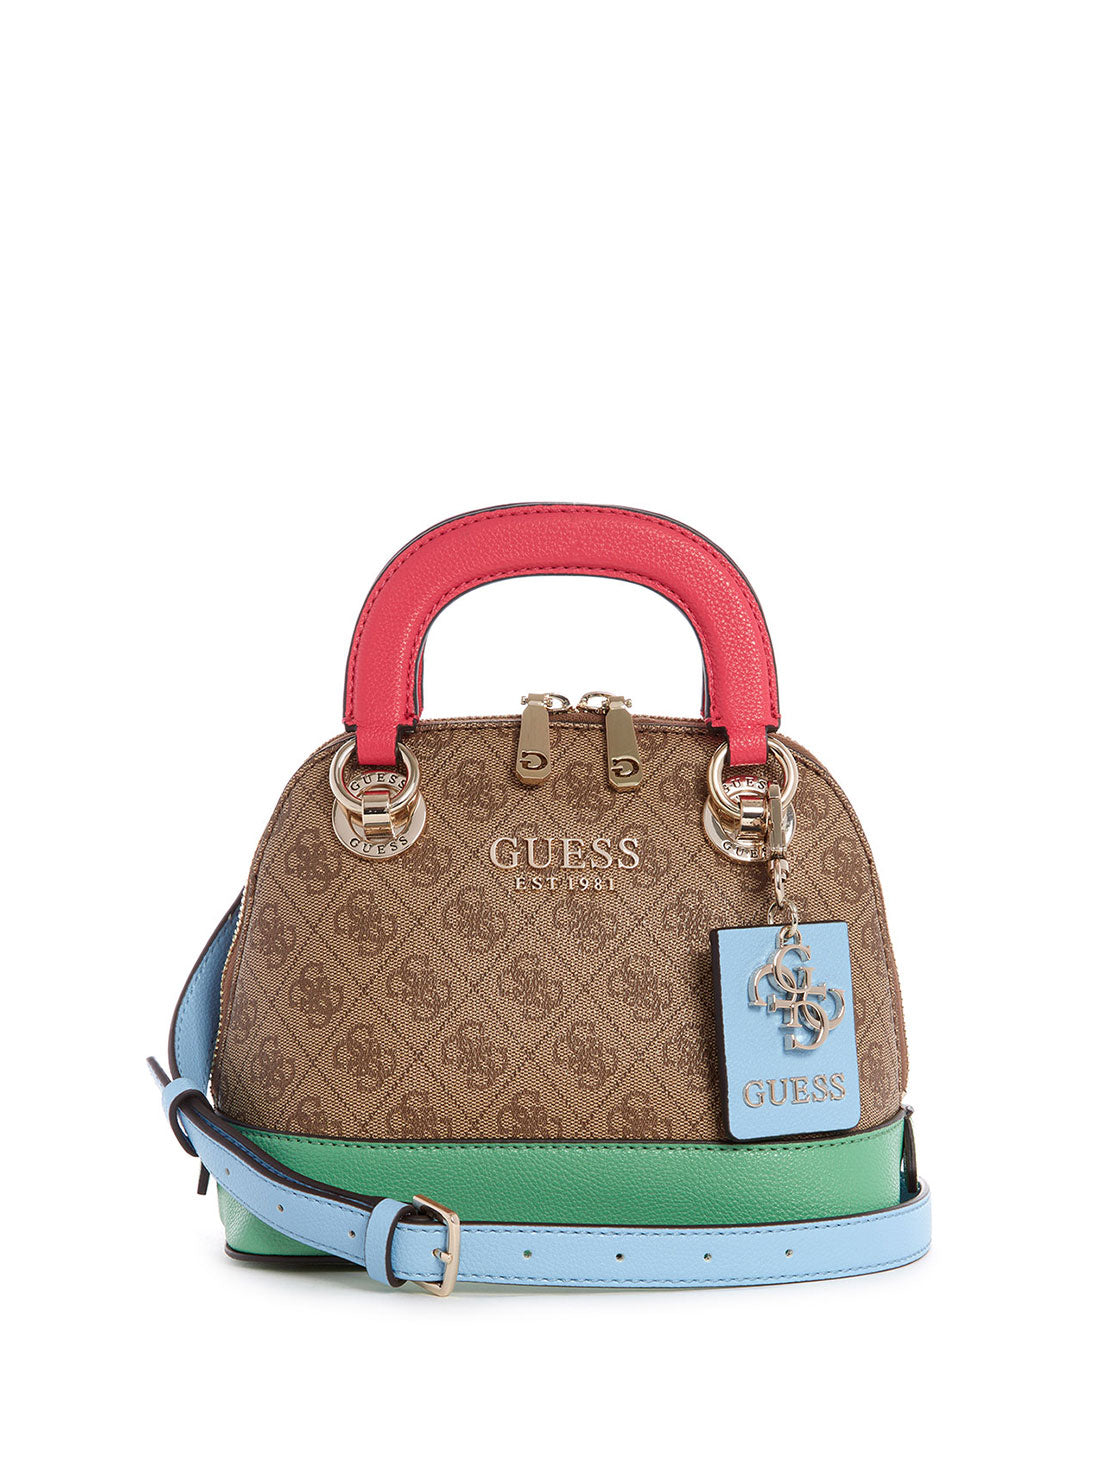 GUESS Womens Brown Multi Cathleen Small Dome Satchel SG773705 Front View